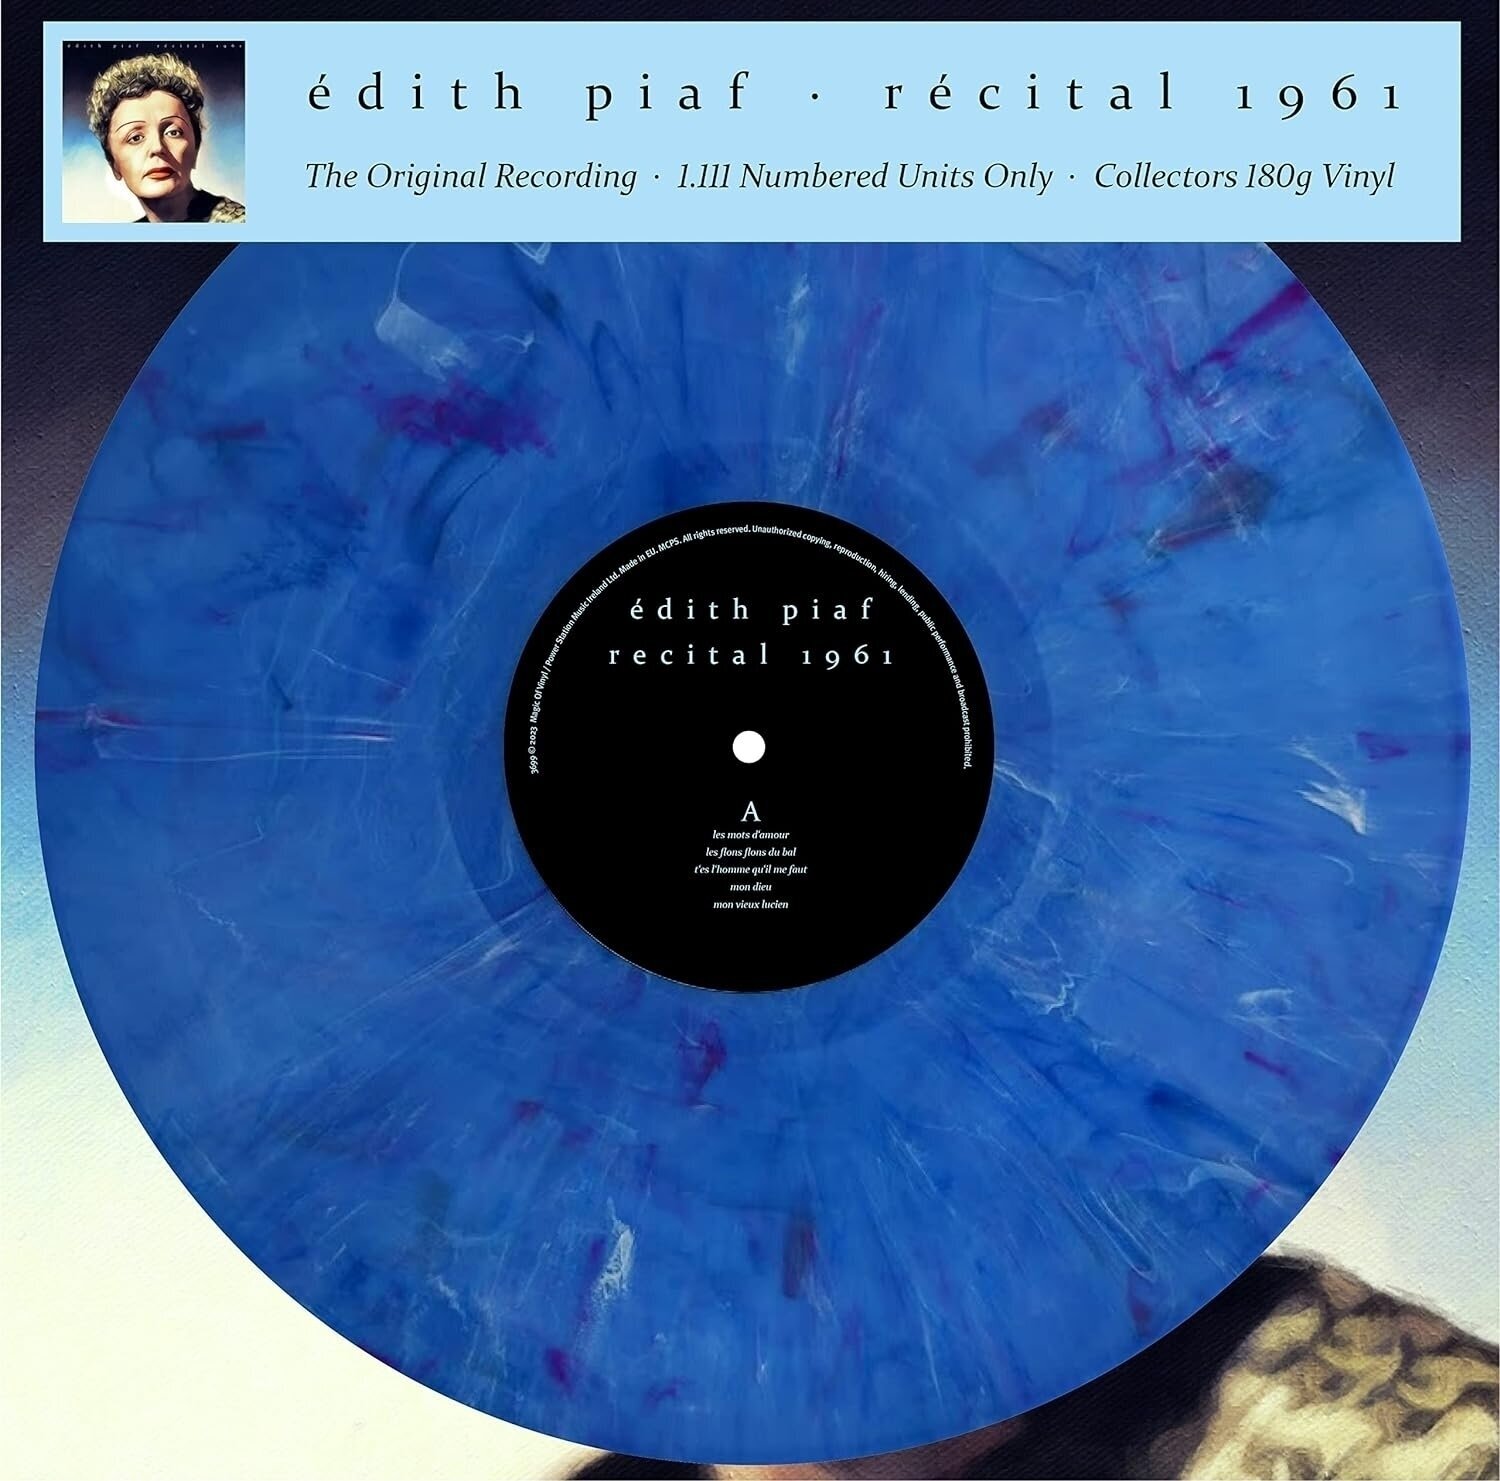 Schallplatte Edith Piaf - Récital 1961 (Limited Edition) (Numbered) (Reissue) (Blue Marbled Coloured) (LP)